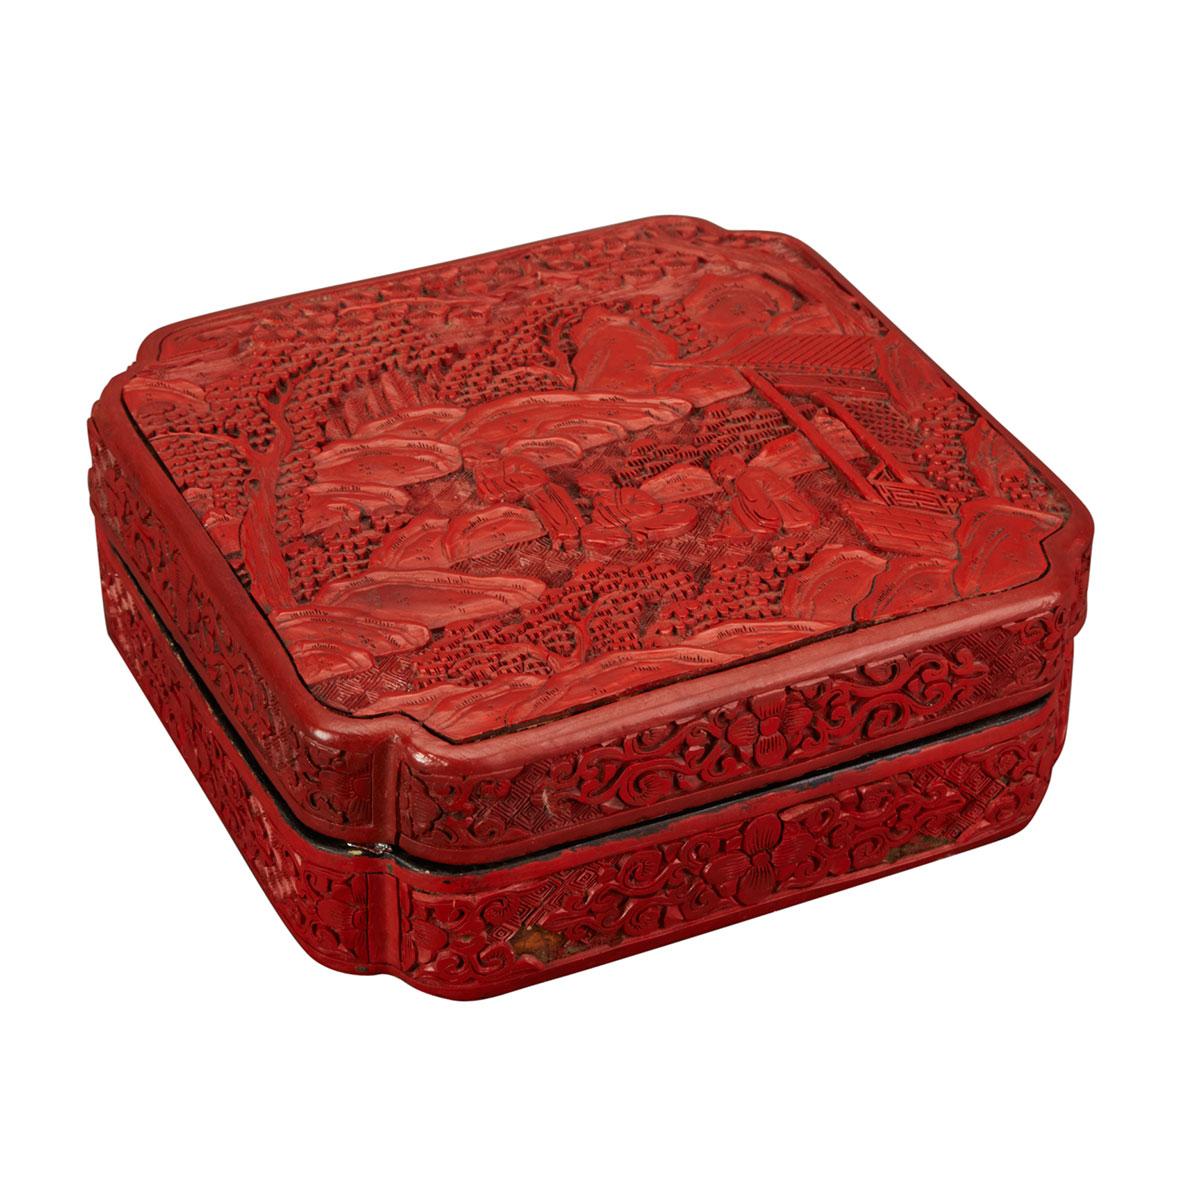 Cinnabar Box and Cover, Late Qing Dynasty